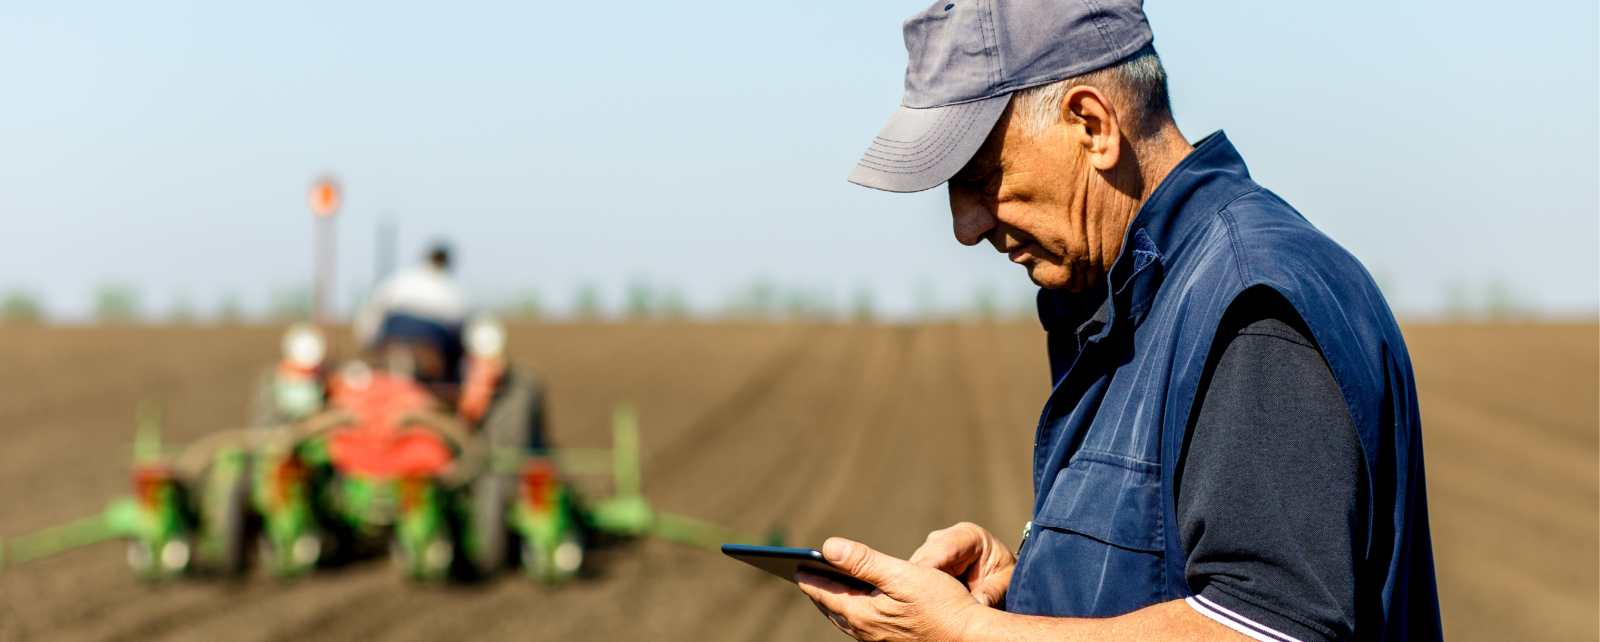 A farmer using a touchscreen tablet in a field, with another farmer operating heavy equipment in the